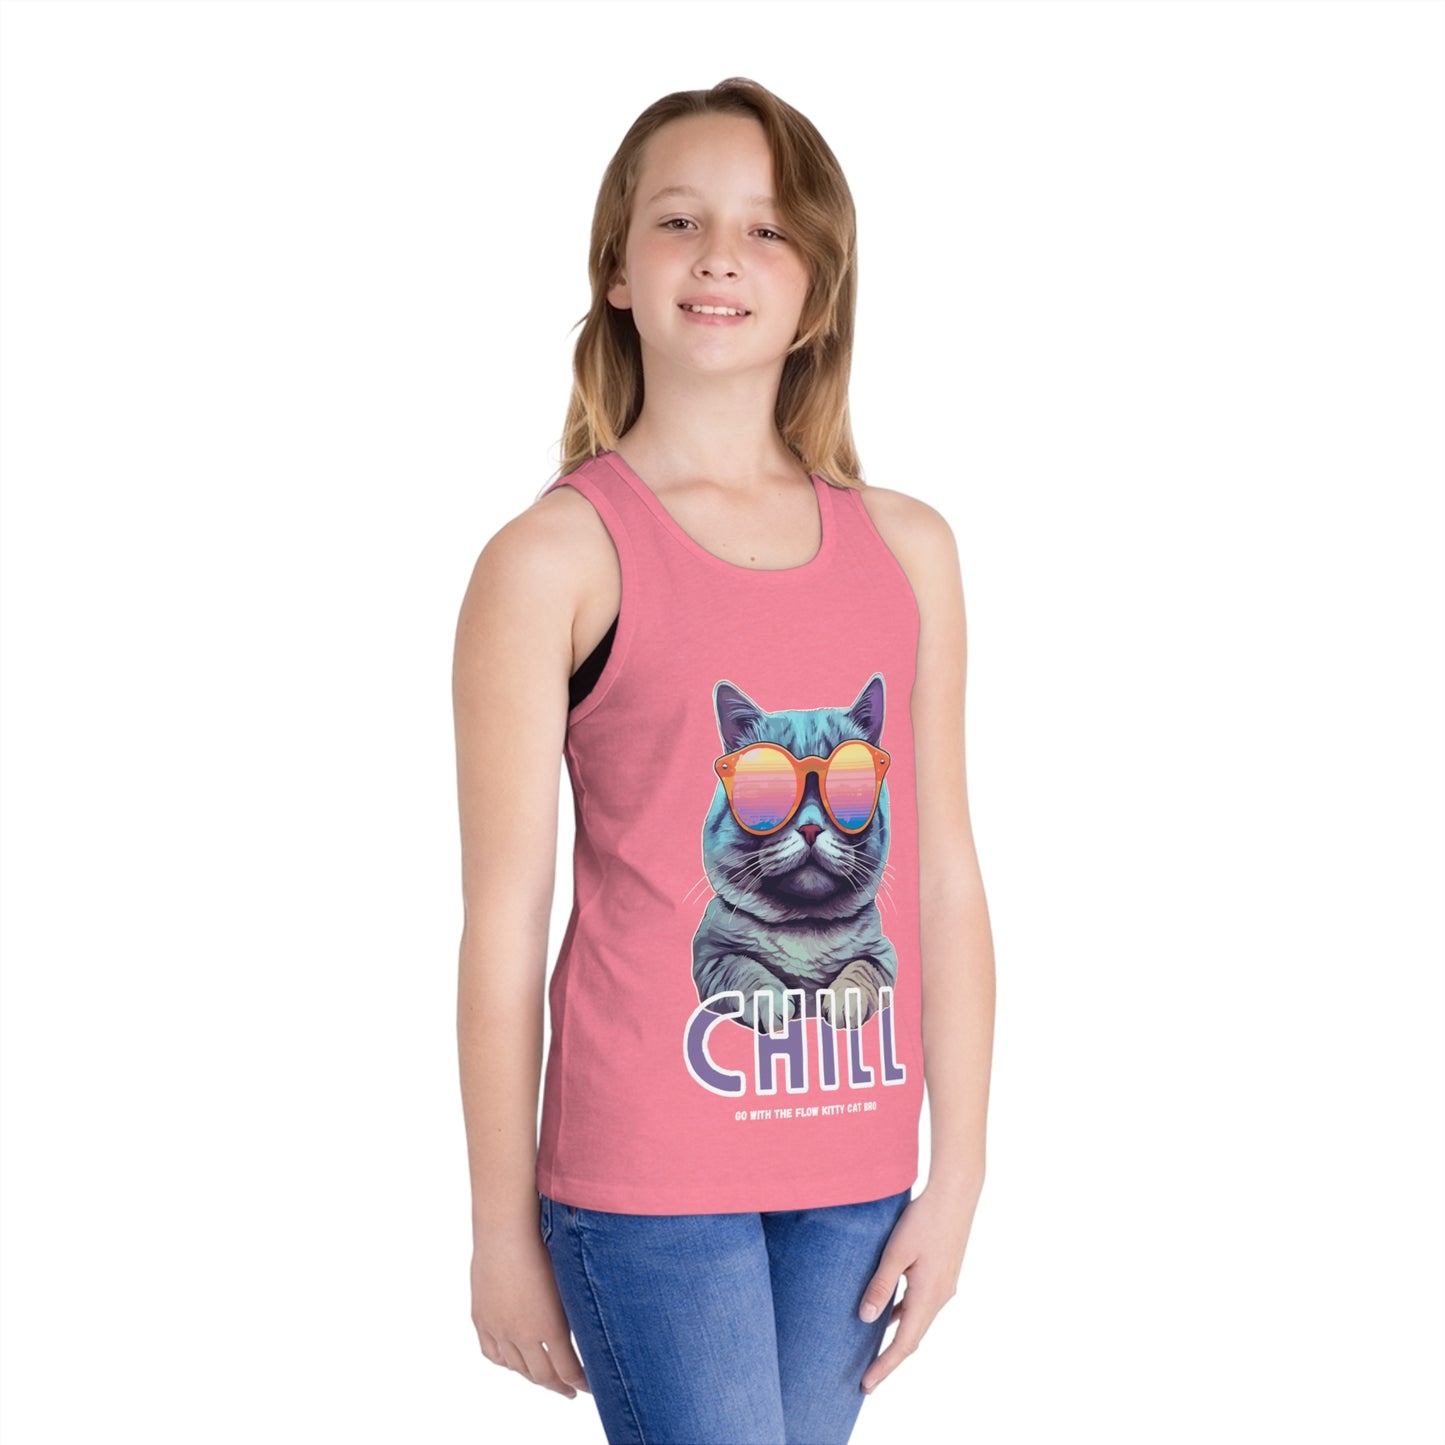 KIDS 'Chill: Go With The Flow Kitty Cat Bro' Kid's Jersey Tank Top